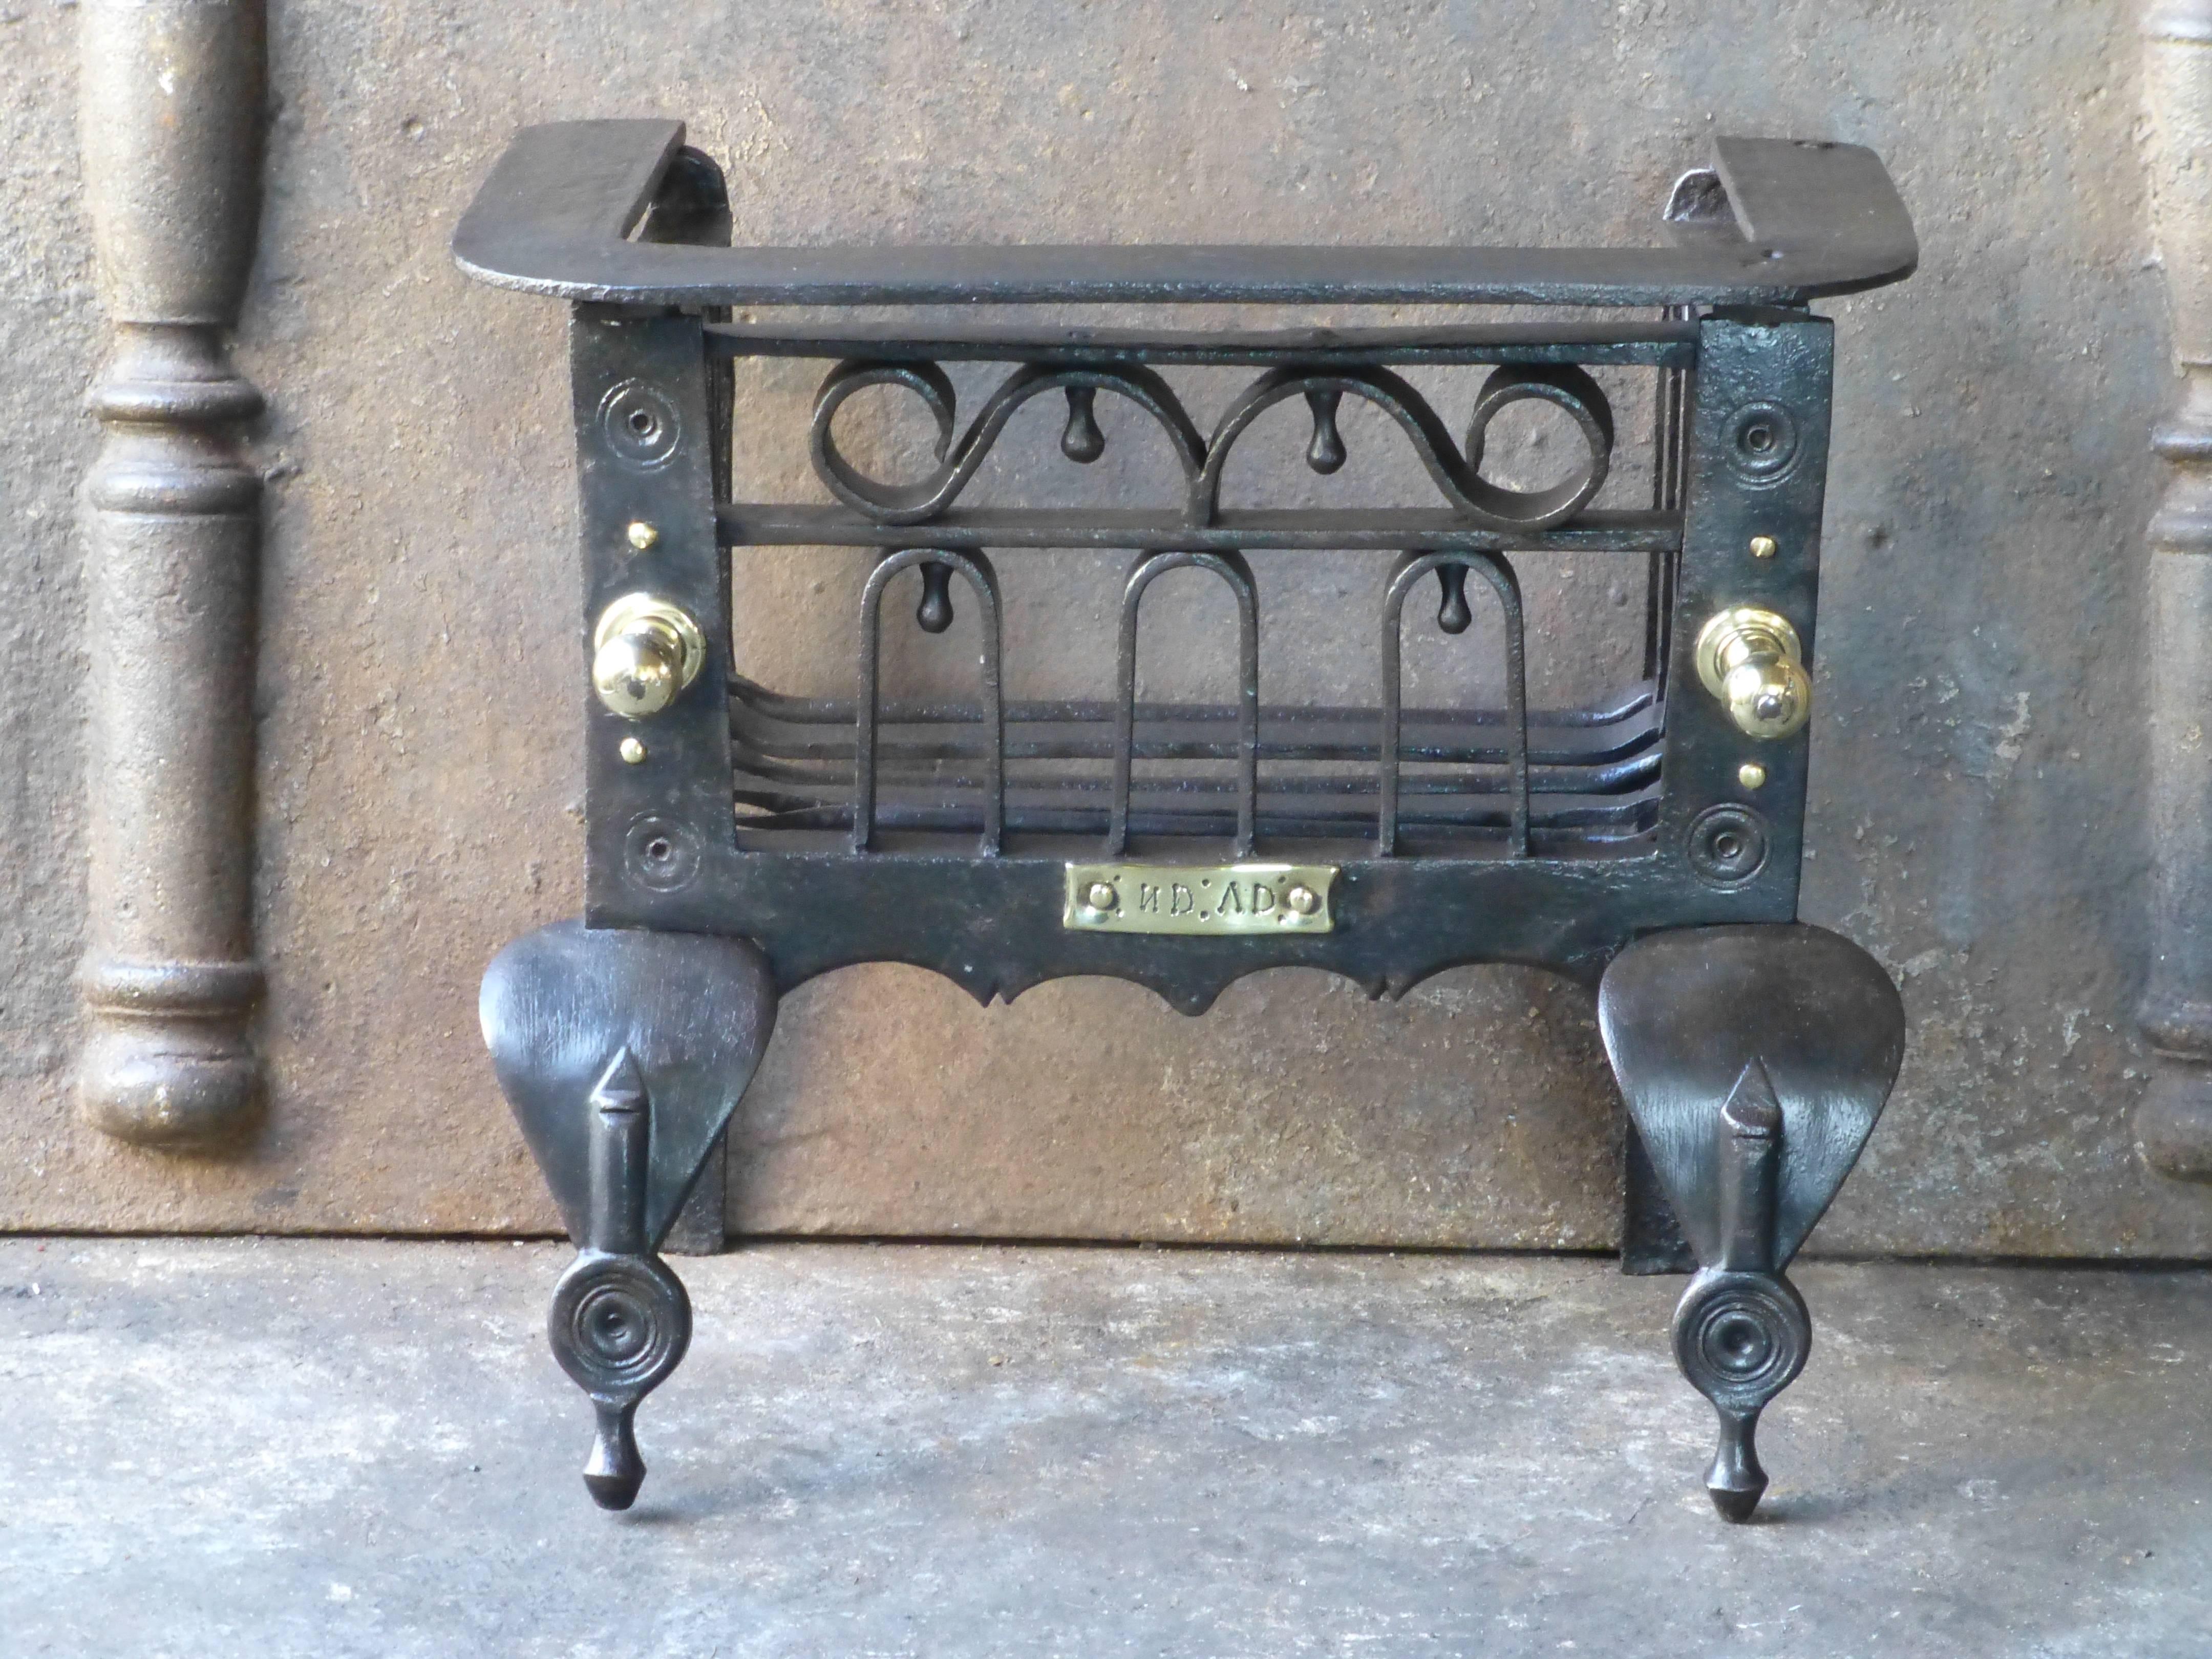 Exceptional fireplace basket, fire basket in excellent condition.